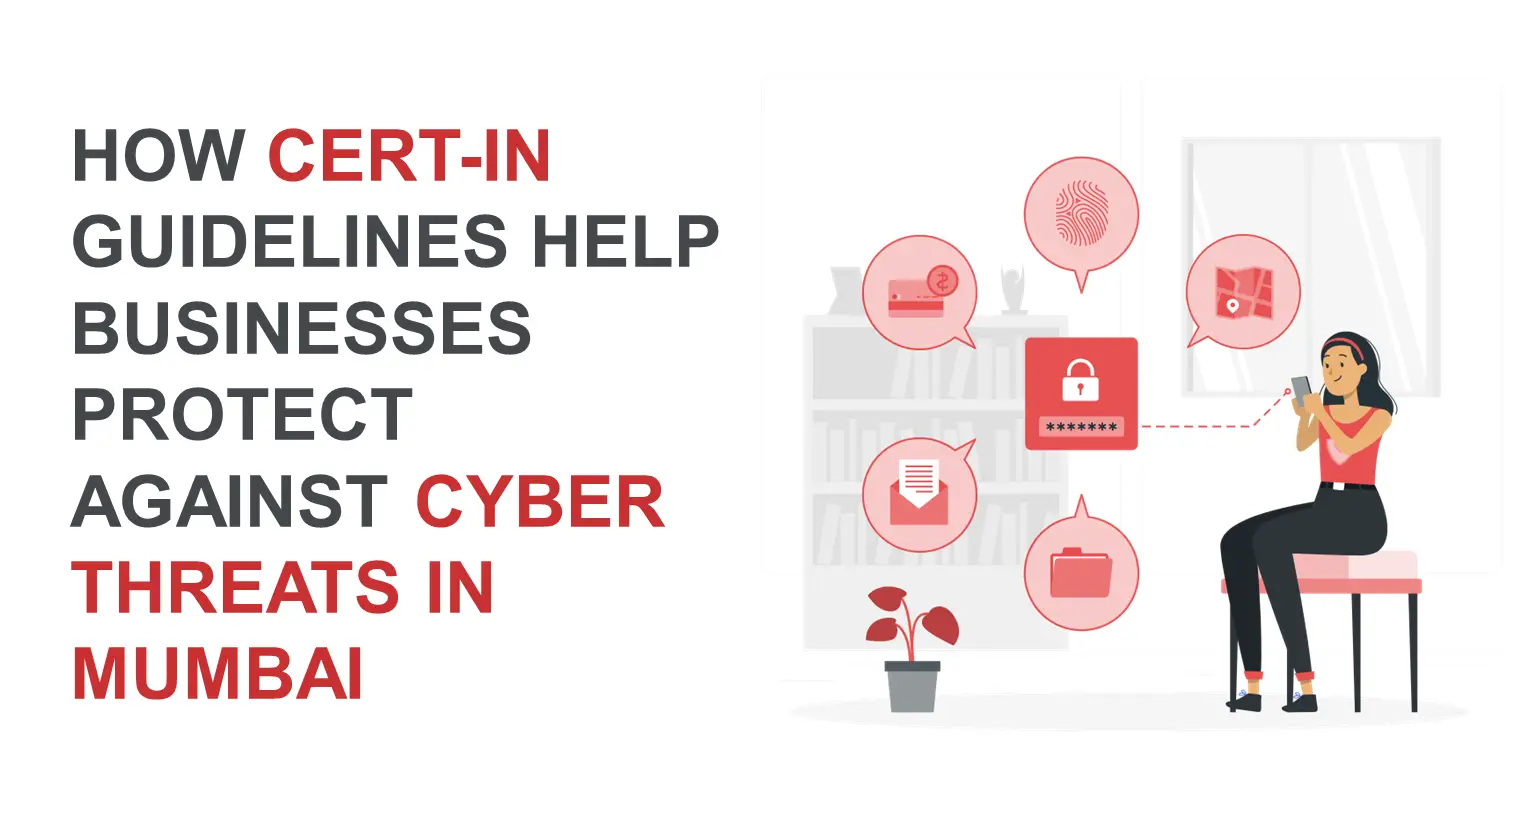 How CERT-In guidelines help businesses protect against cyber threats in Mumbai